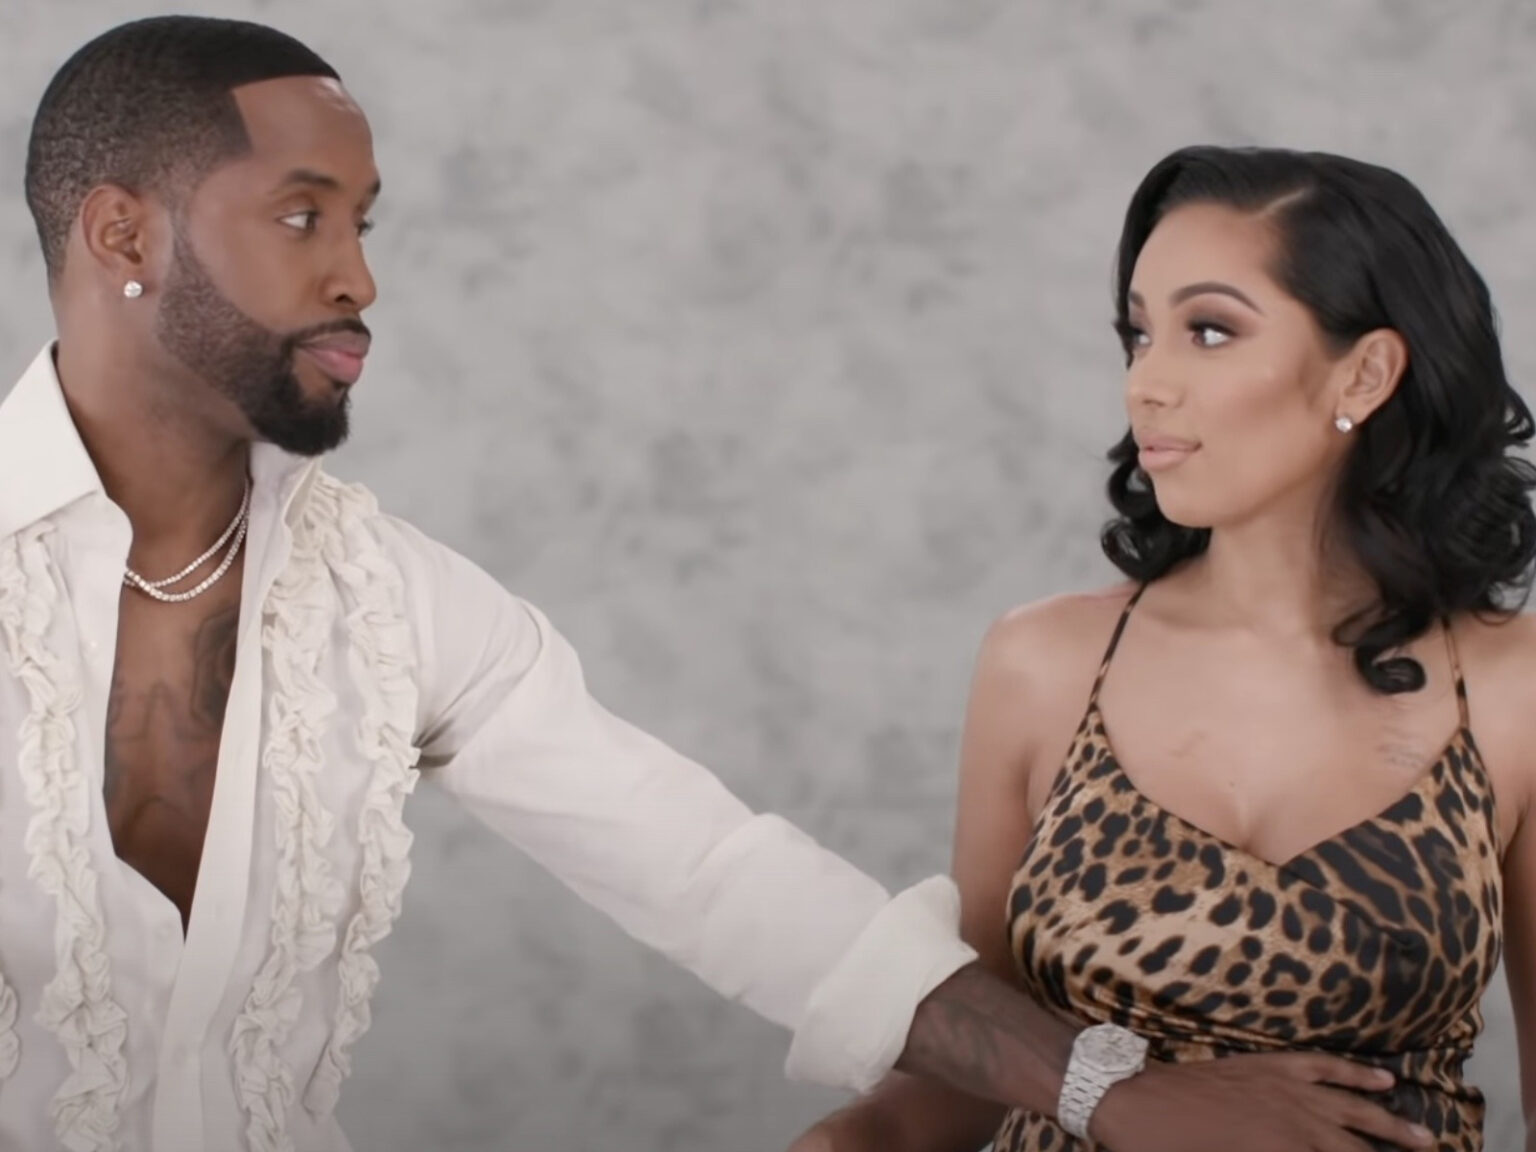 First wedding and pregnancy announcements, and now a sudden divorce? Check out why 'Love & Hip-Hop' stars Erica Mena and Safaree are heading to splitsville.